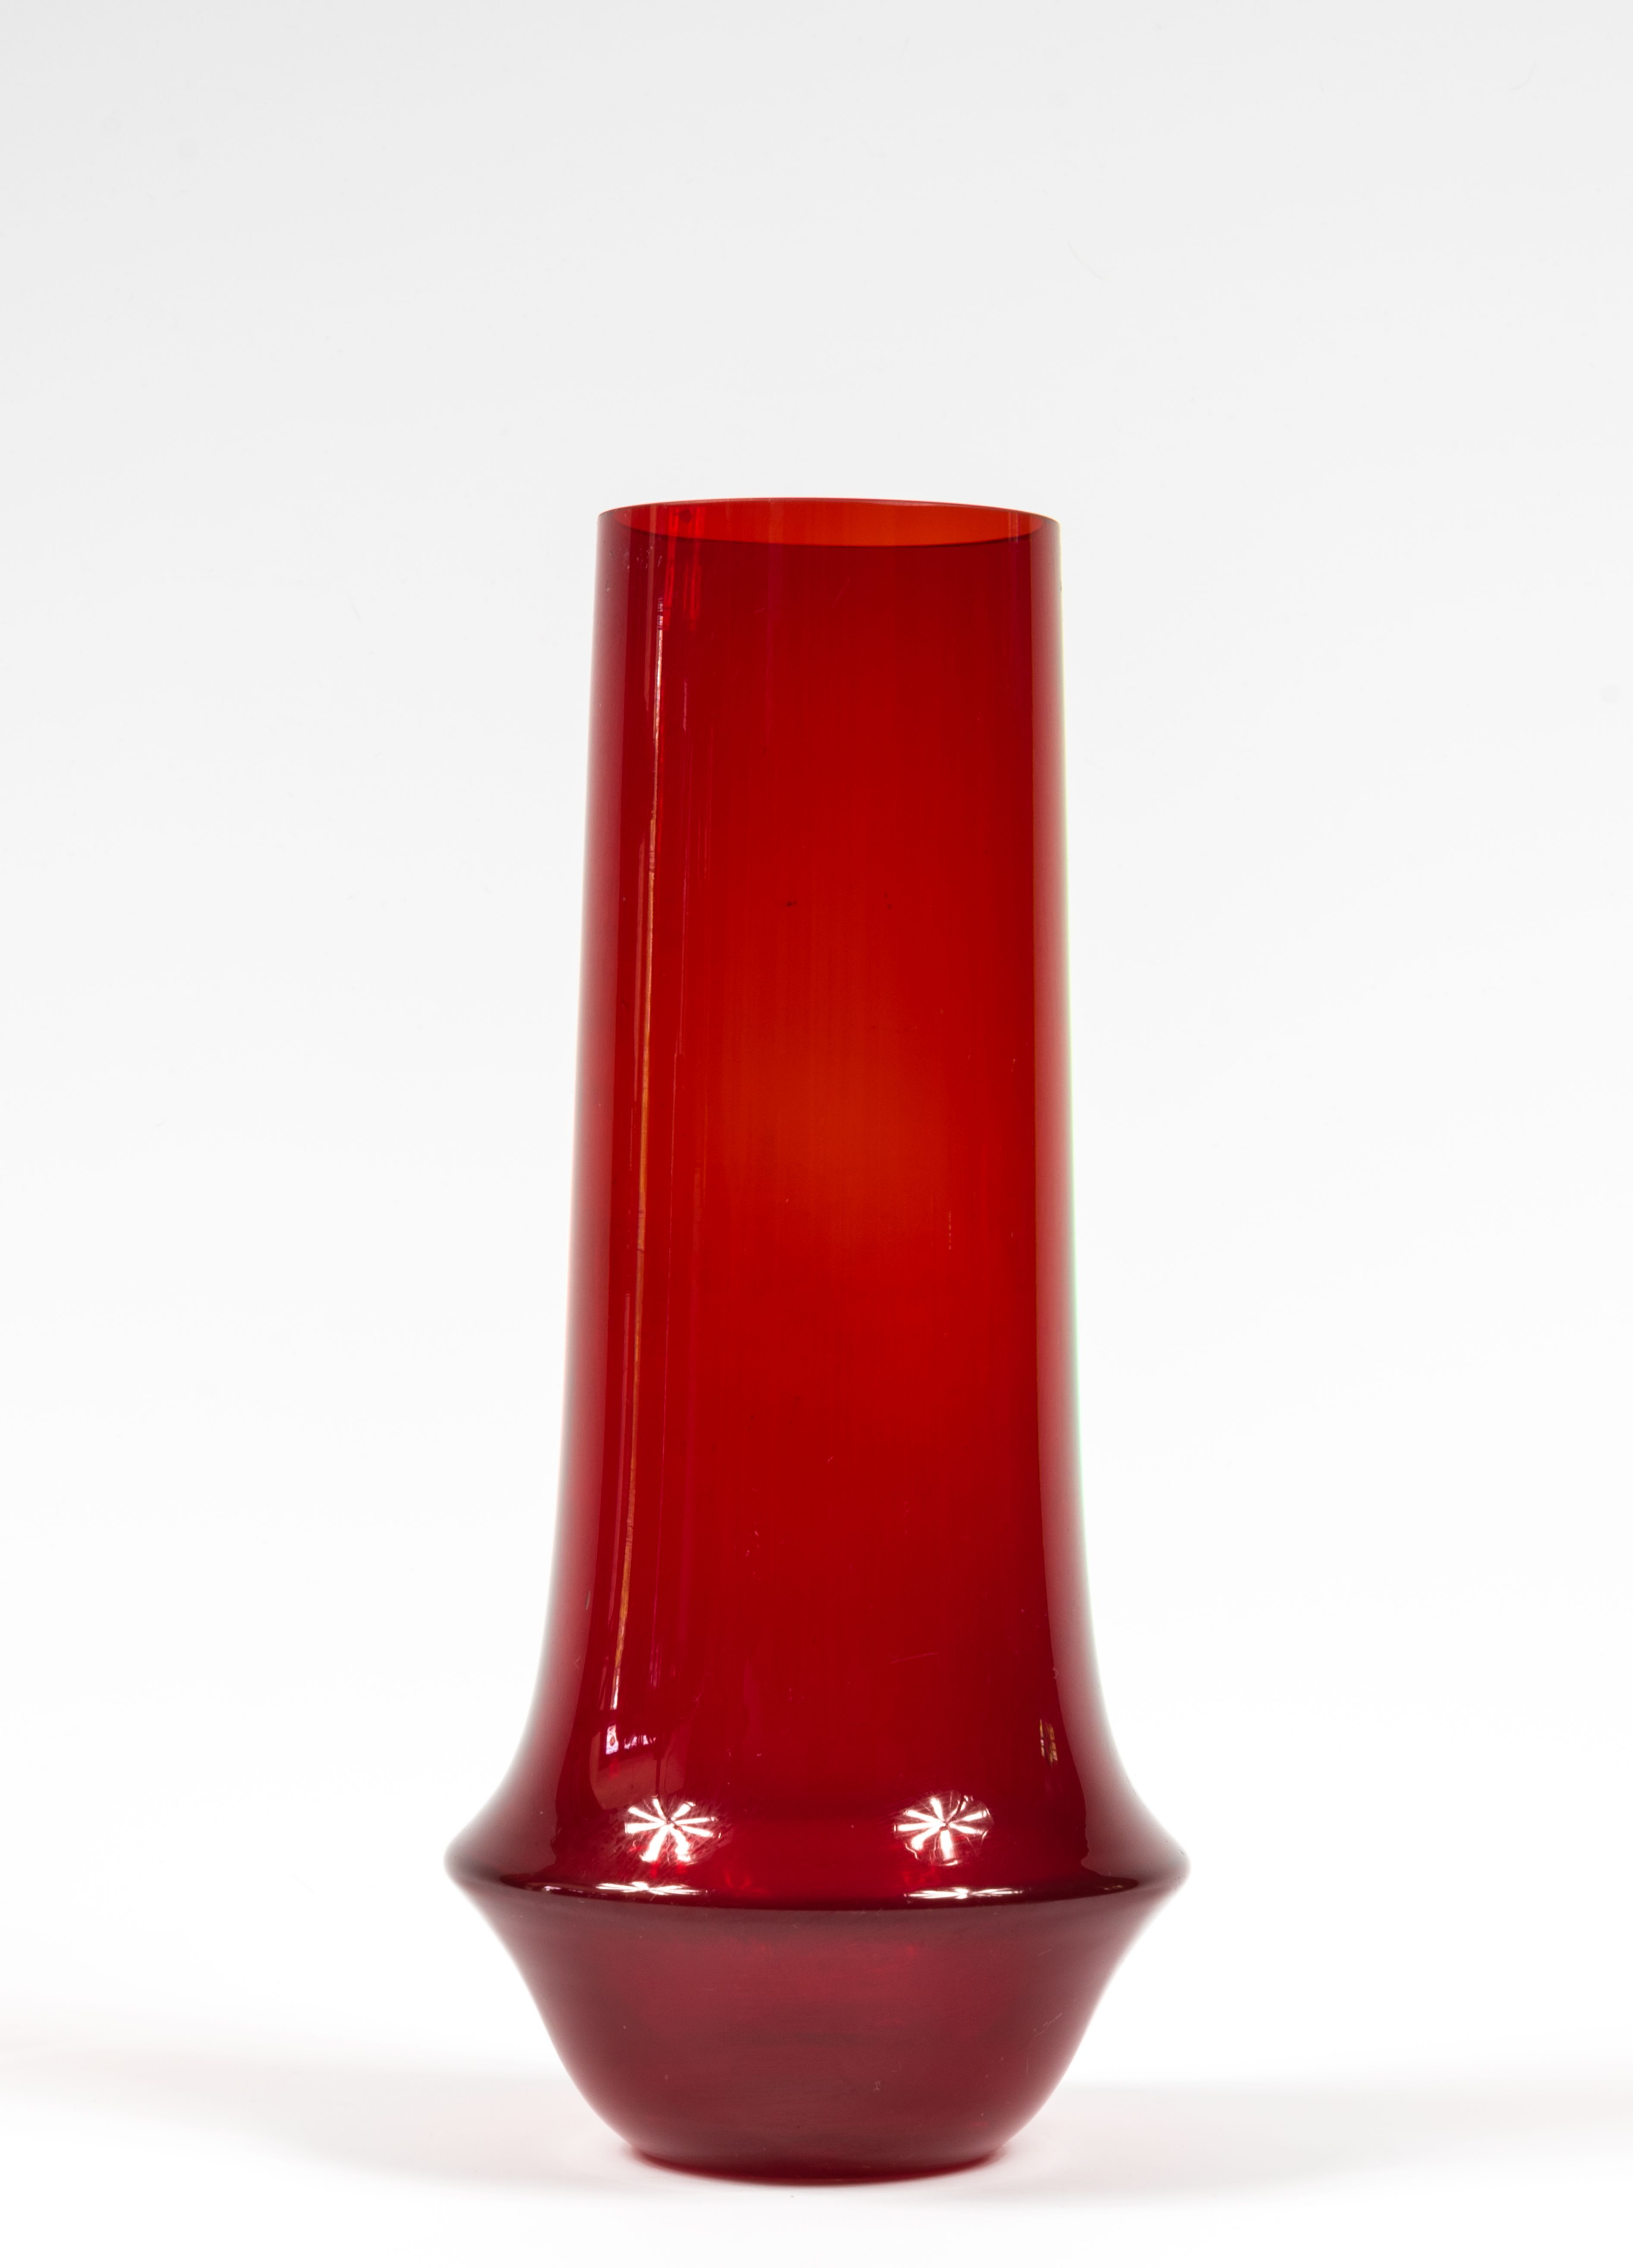 17 Fabulous 40 Inch Tall Glass Cylinder Vases 2024 free download 40 inch tall glass cylinder vases of riihimac2a4en lasi oy riihimaki red glass vase by tamara aladin in large scandinavian red glass vase designed by tamara aladin c1963 for riihimaki riihim